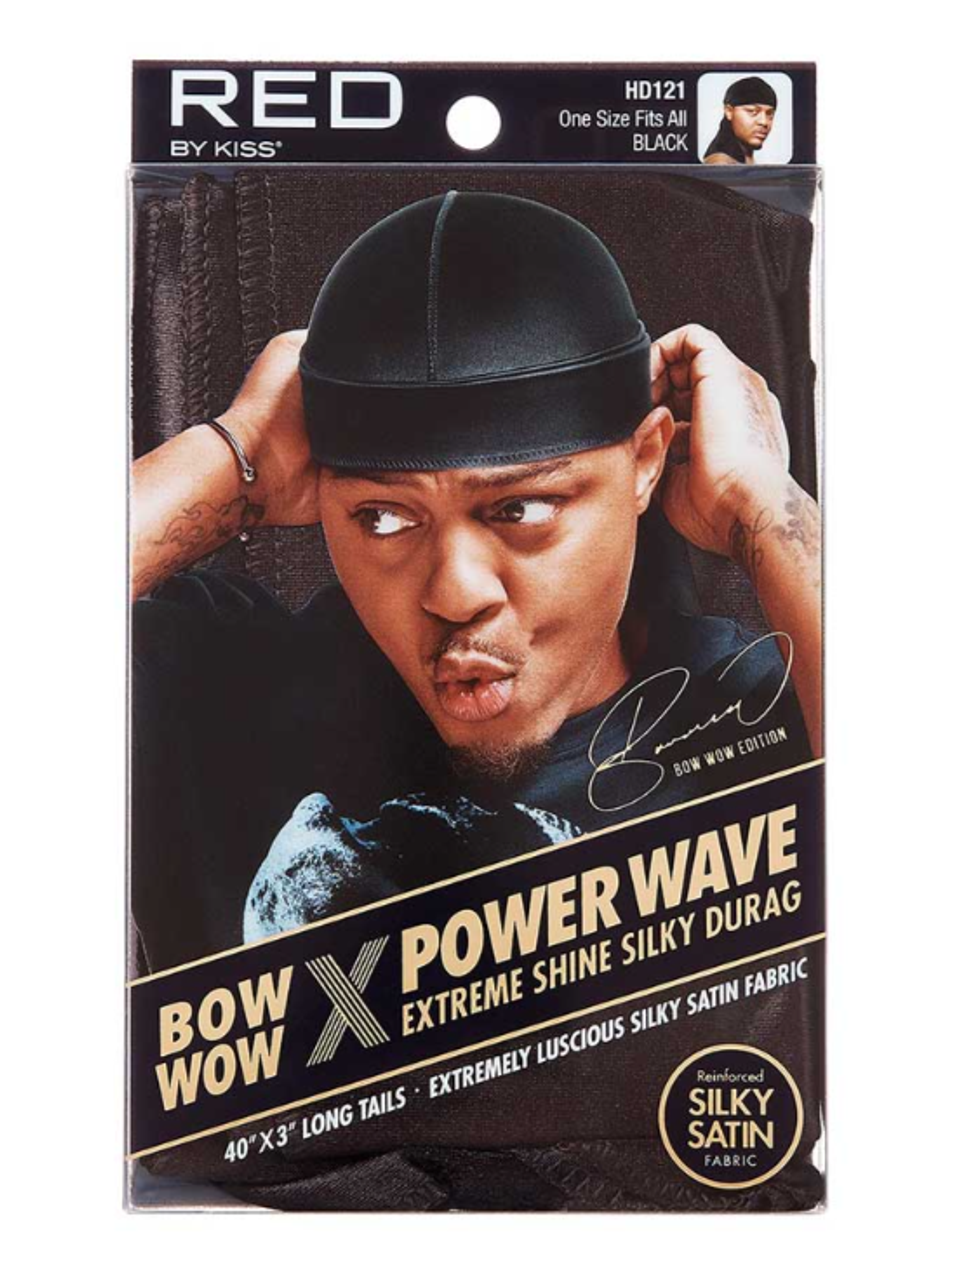 BOW WOW X Power Wave Extreme Silky Durag